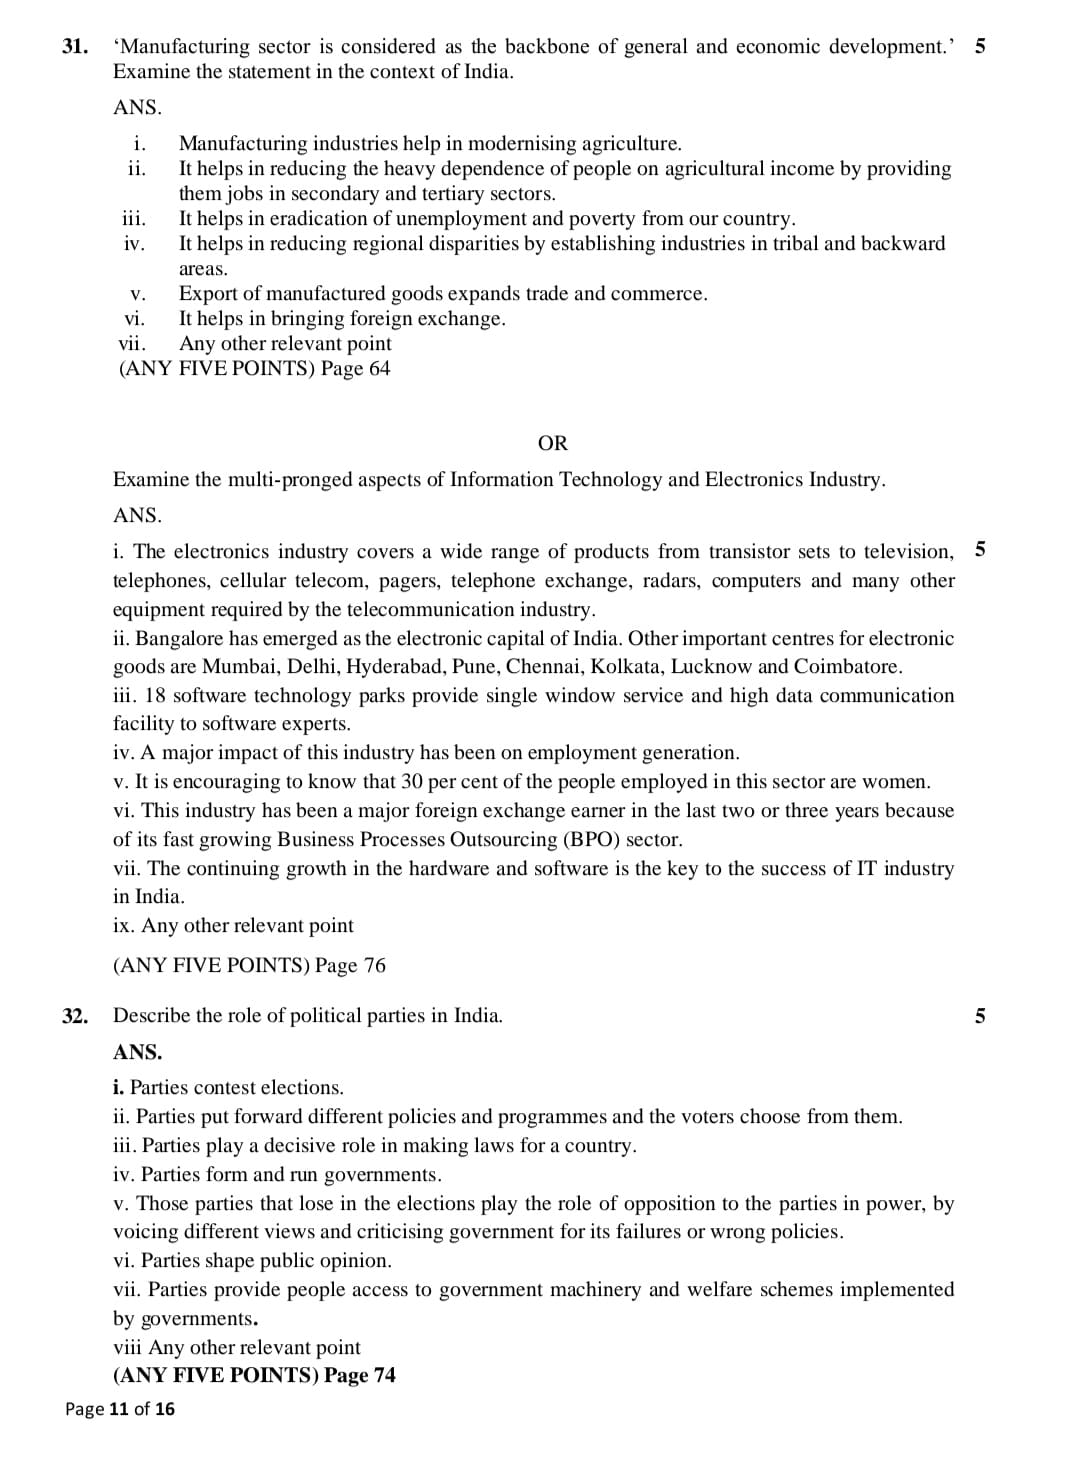 cbse class 10 social science official sample question paper11